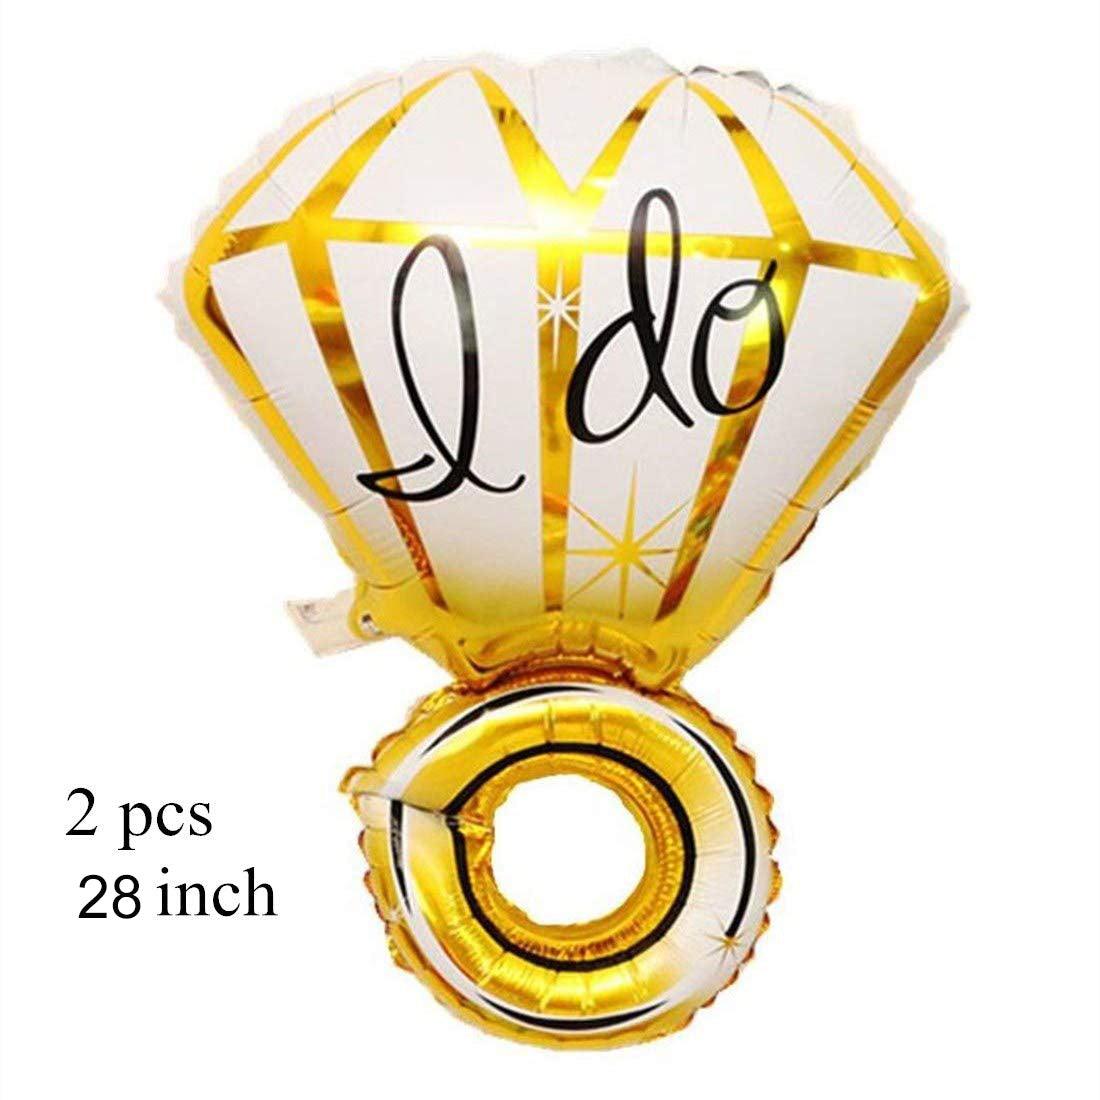 Engagement Party Decoration Balloon | 40 inches Love & Two Diamond Rings Balloon Decoration Set | Proposal Party Decoration - If you say i do